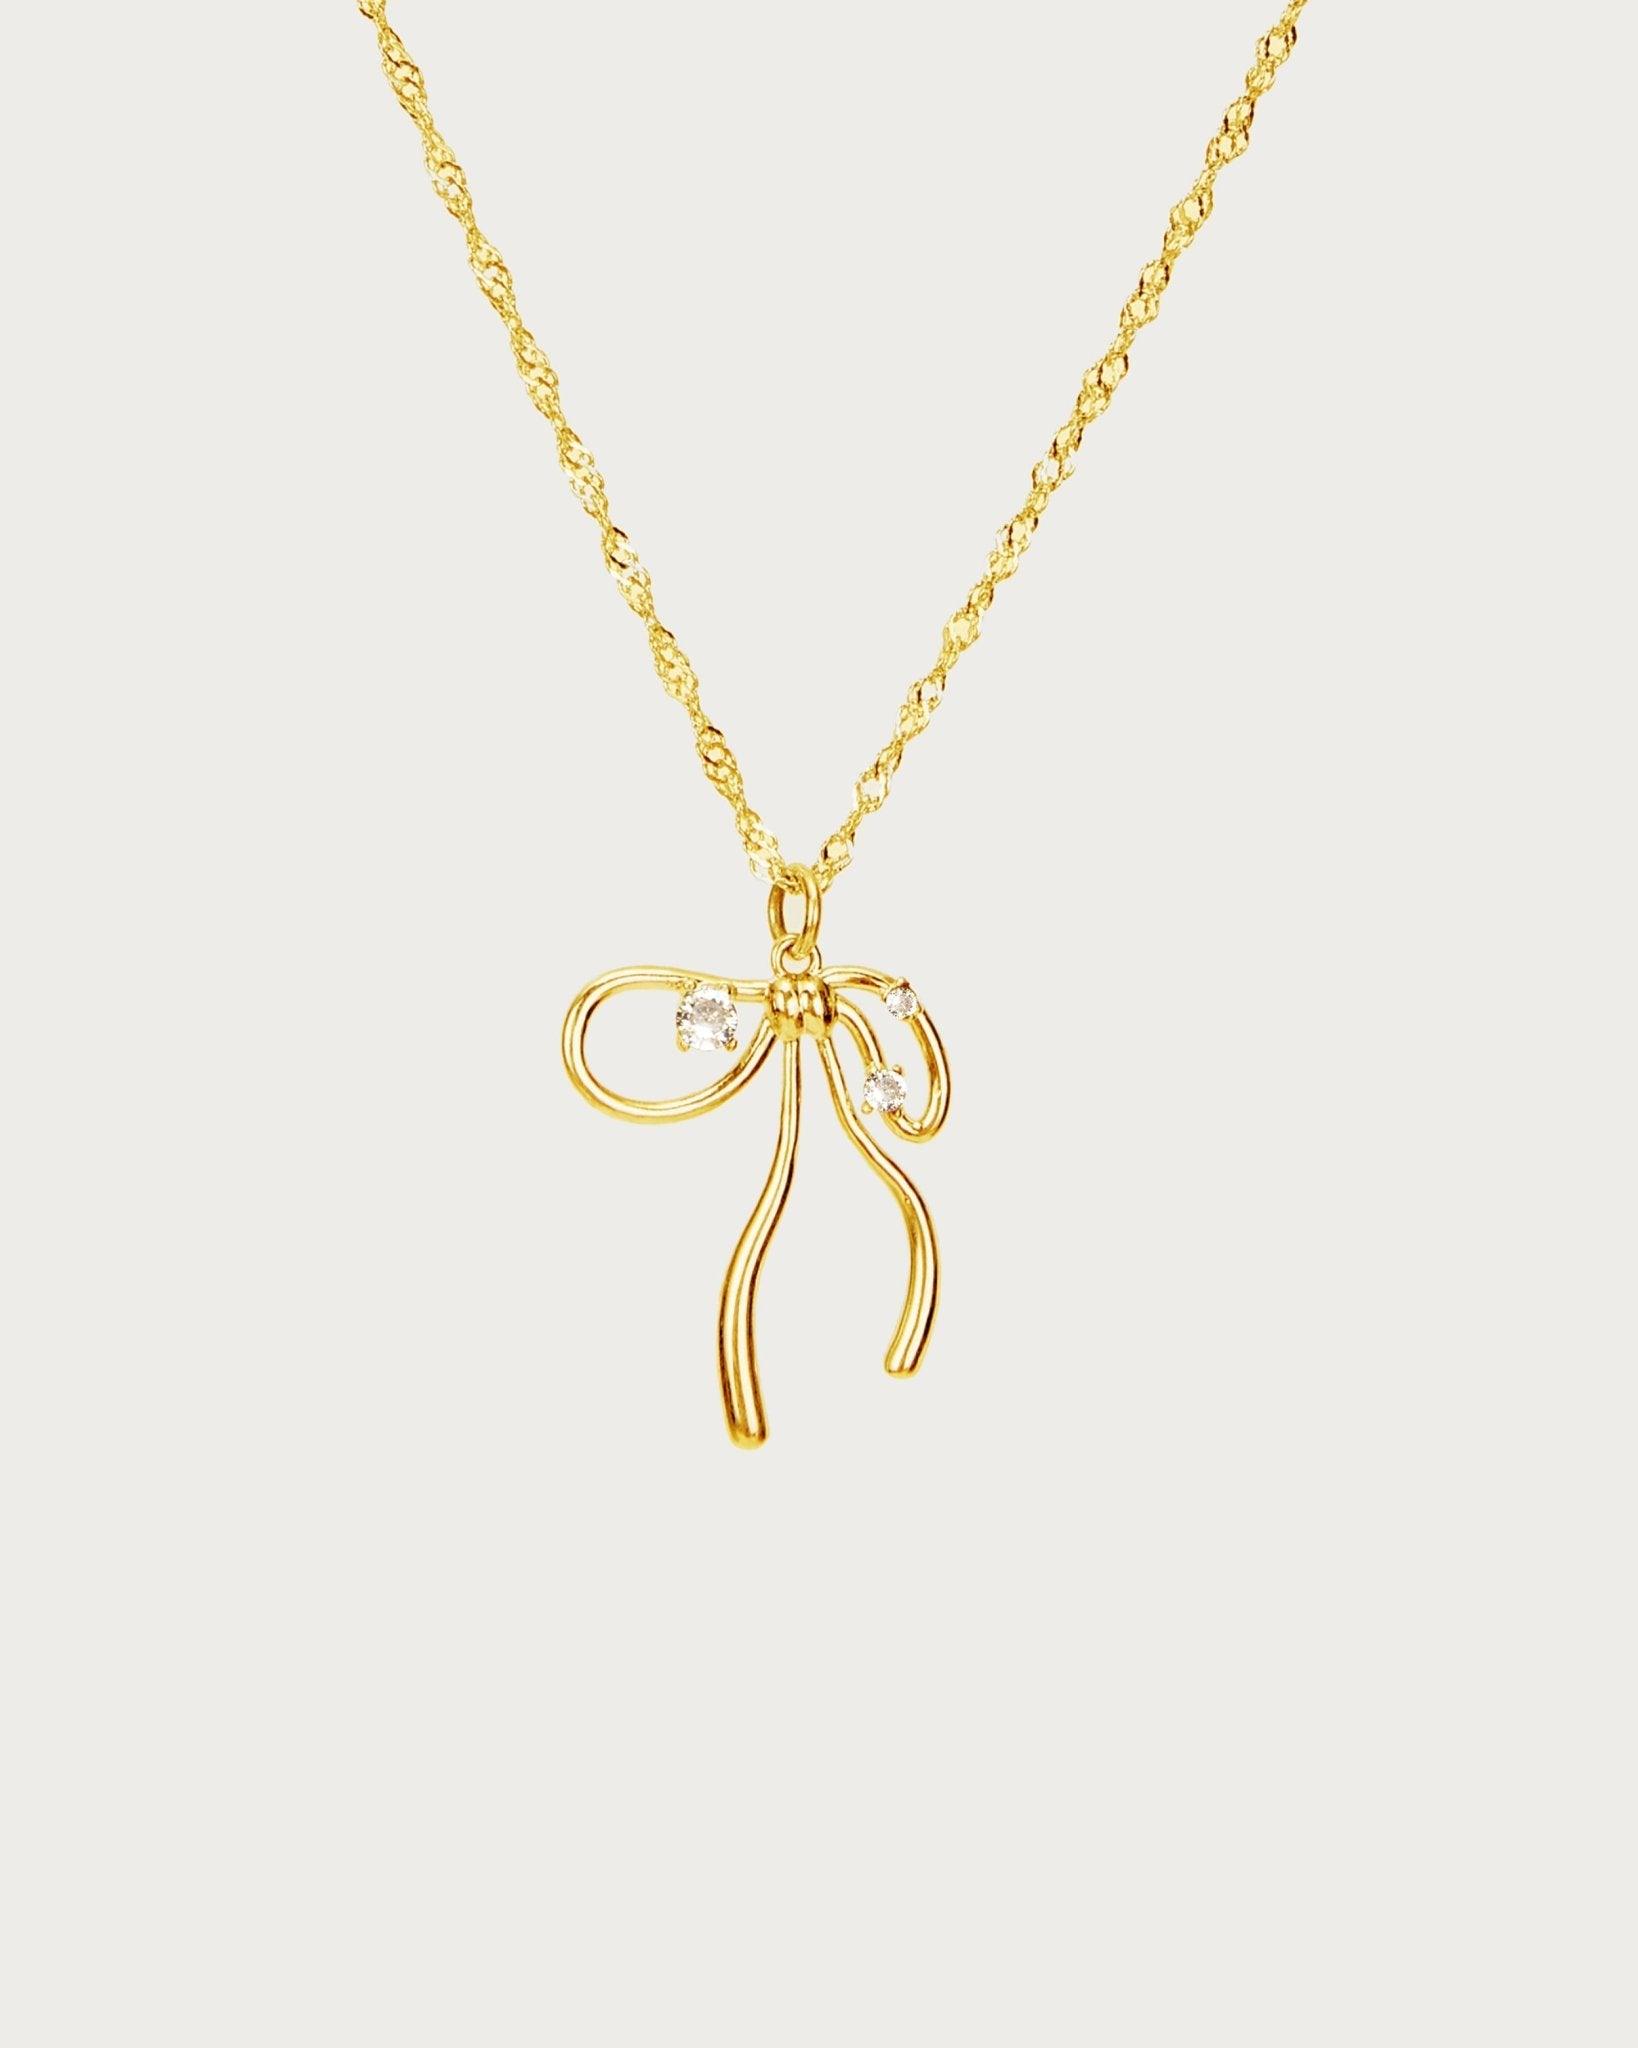 The Miffy Necklace - En Route Jewelry